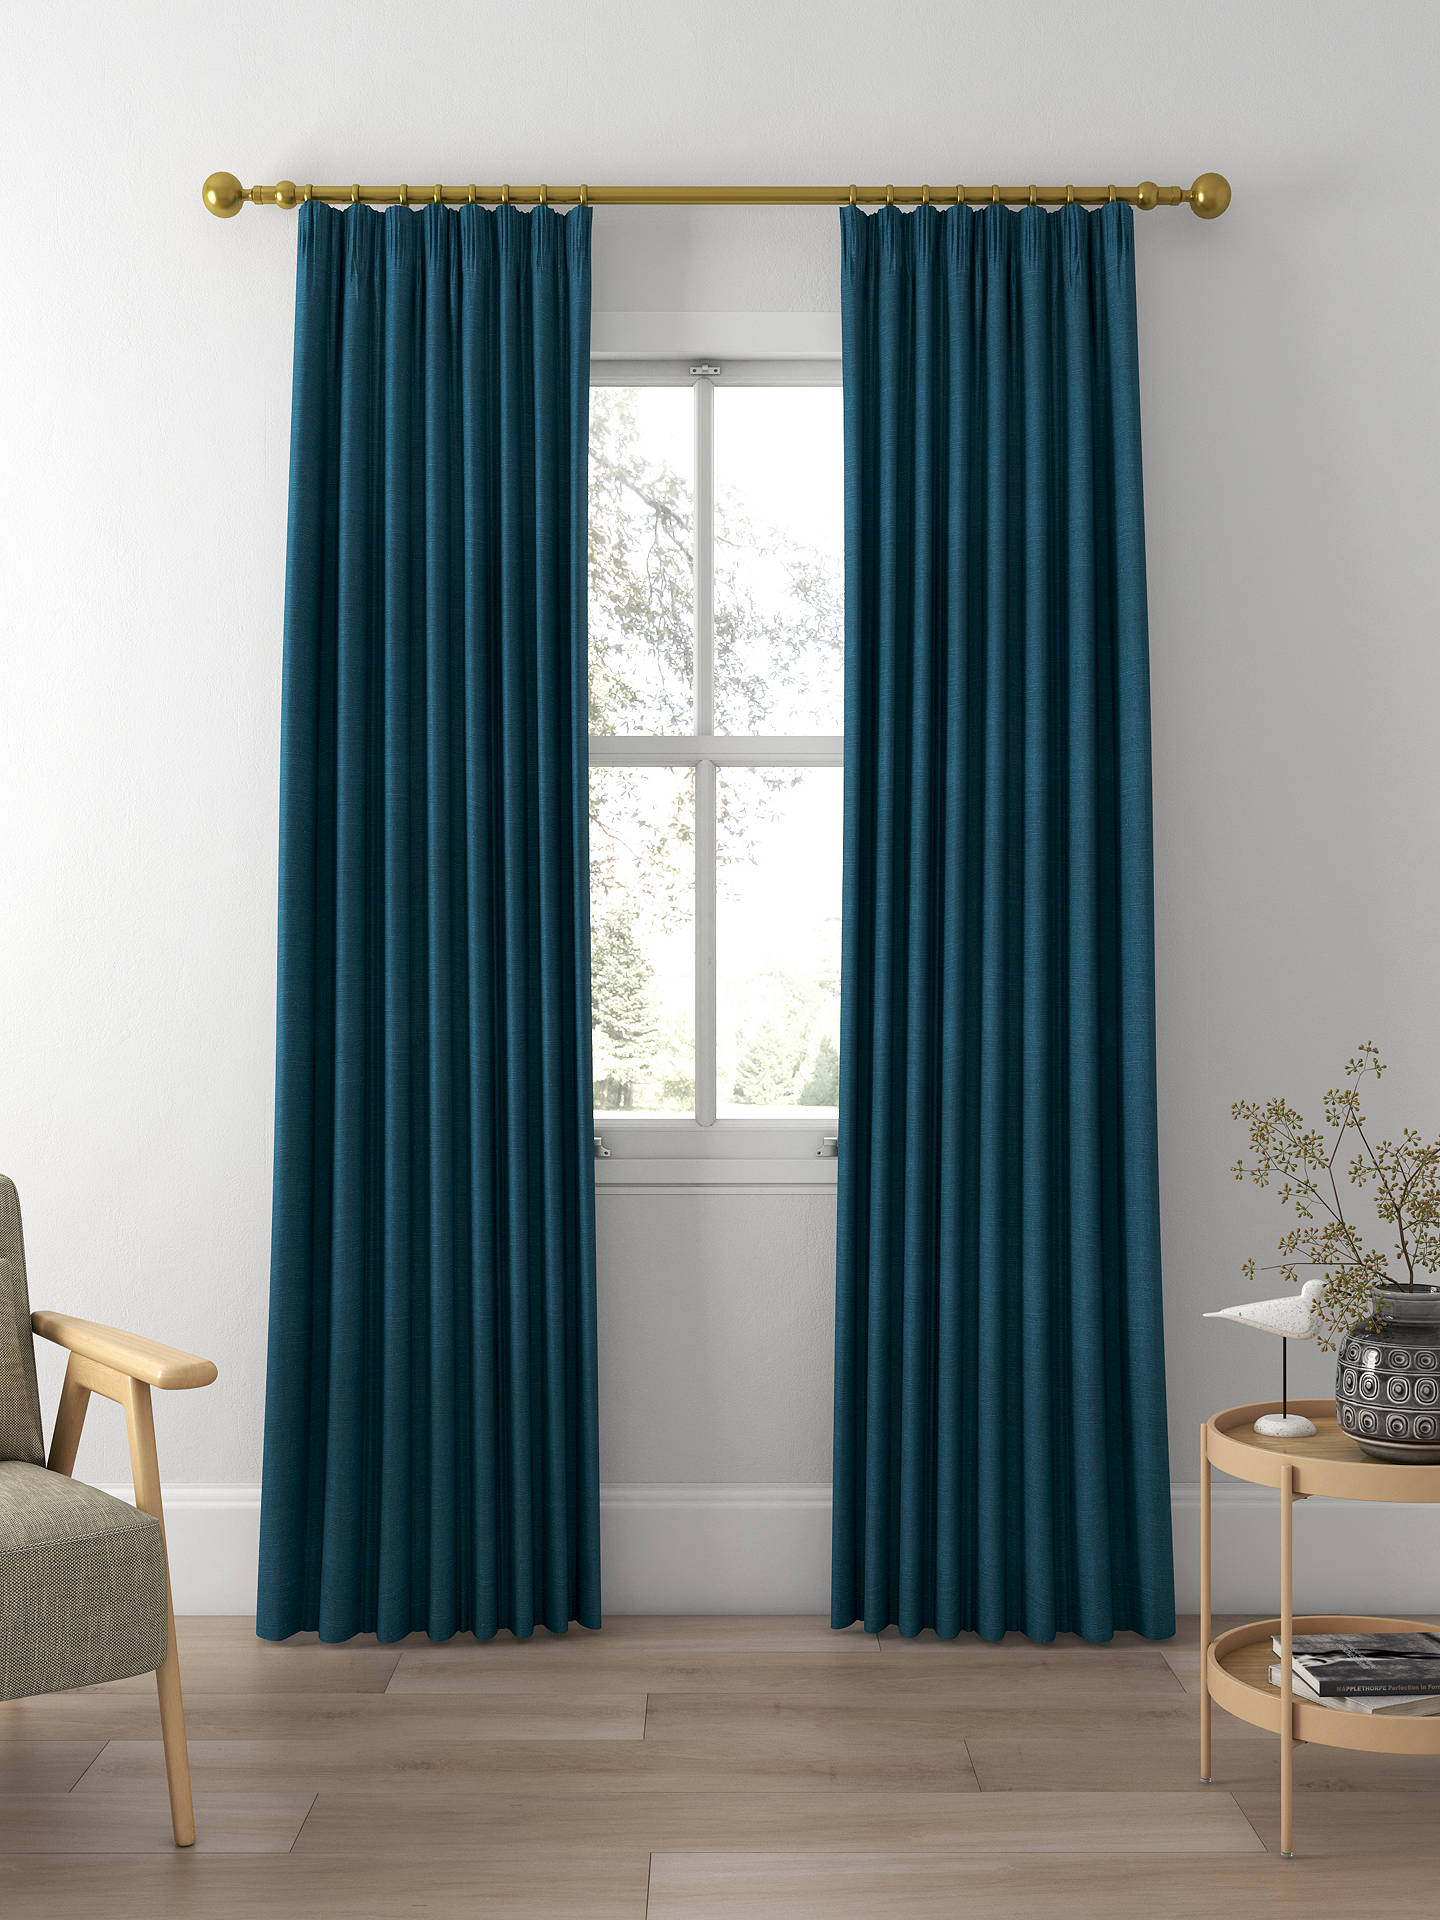 Sanderson Tuscany II Made to Measure Curtains, Newby Green